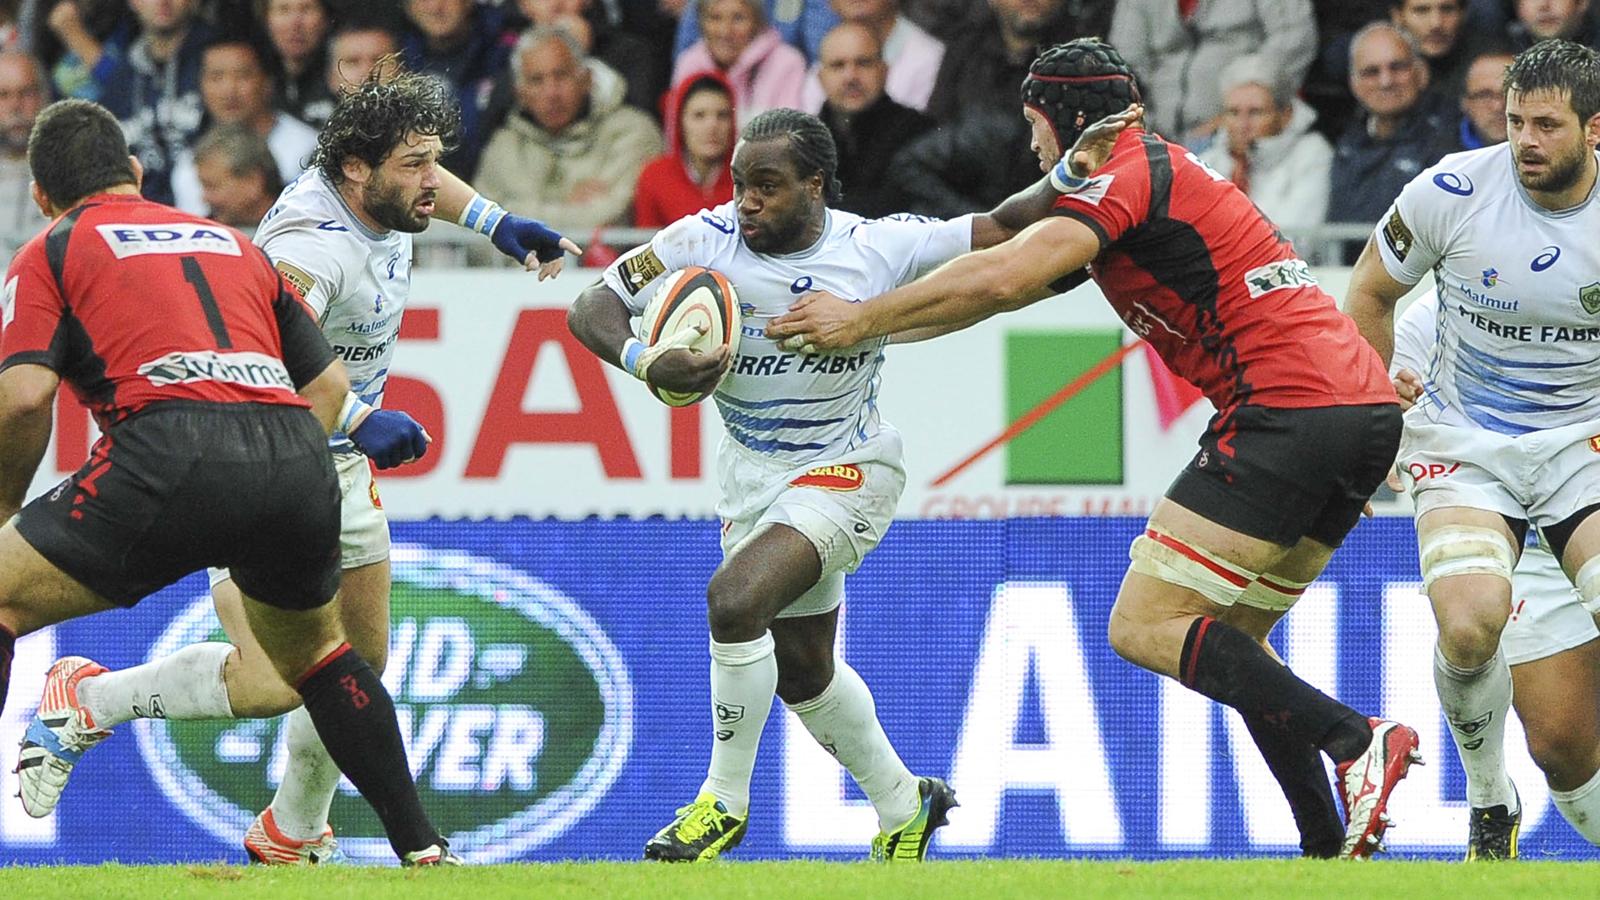 Rugby Castres Olympique vs Oyonnax en direct streaming live